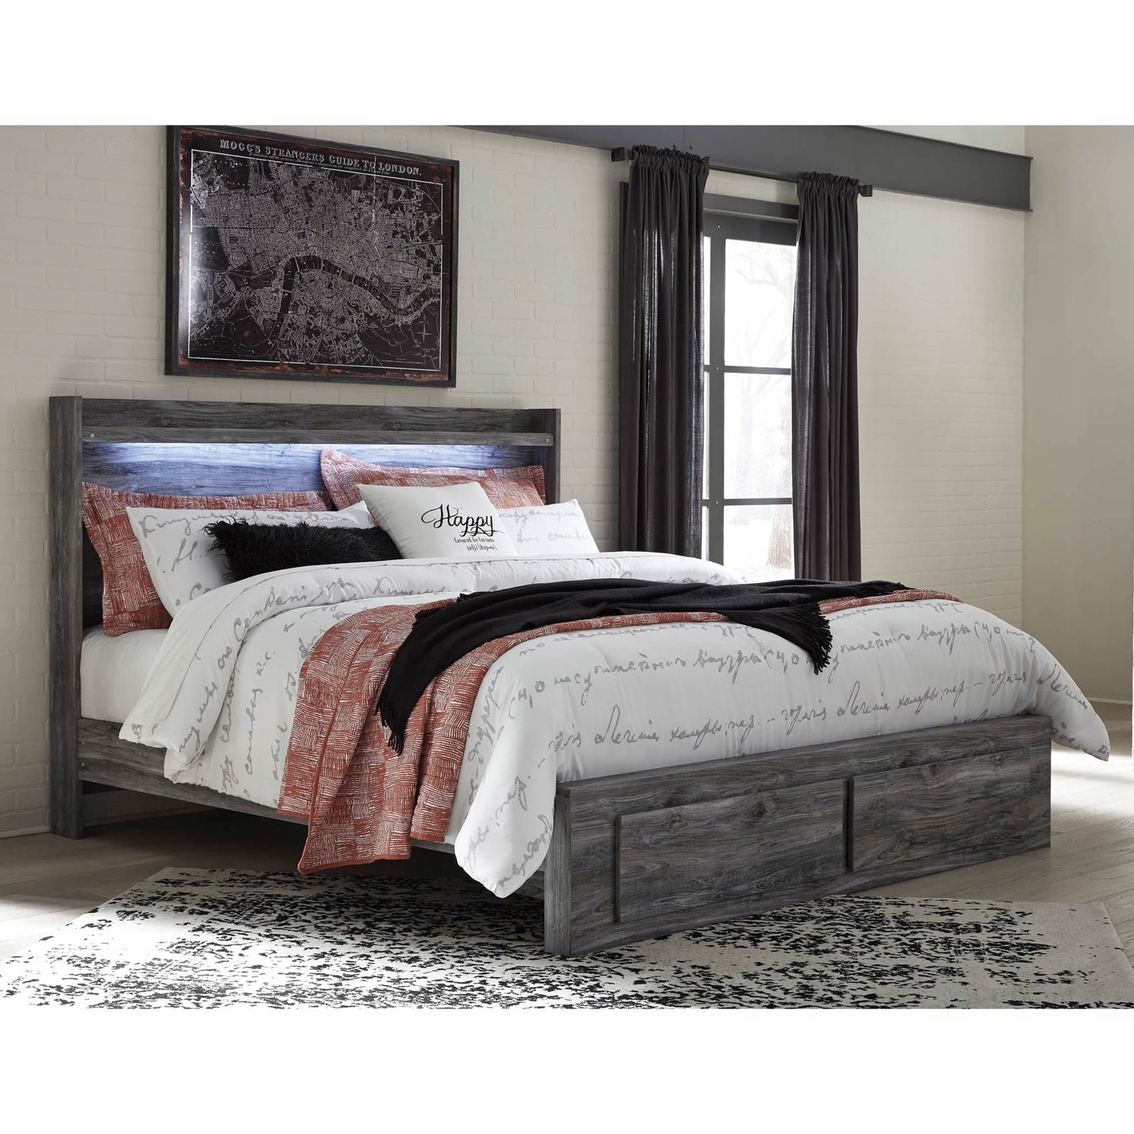 Signature Design by Ashley Baystorm 2 Drawer Storage Bed - Image 2 of 4